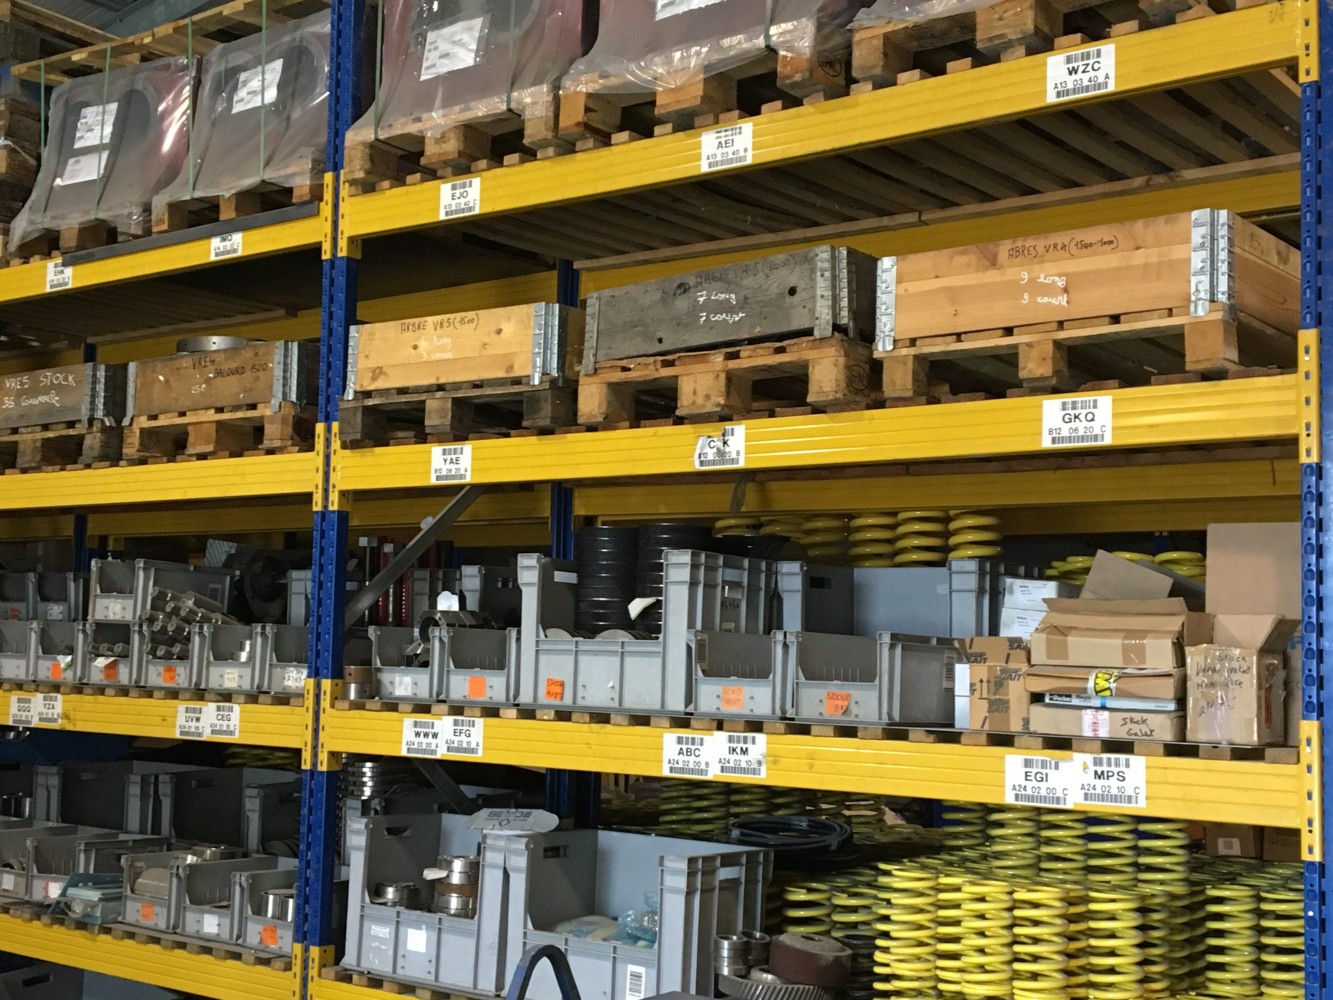 Some of the replacement parts we have in stock